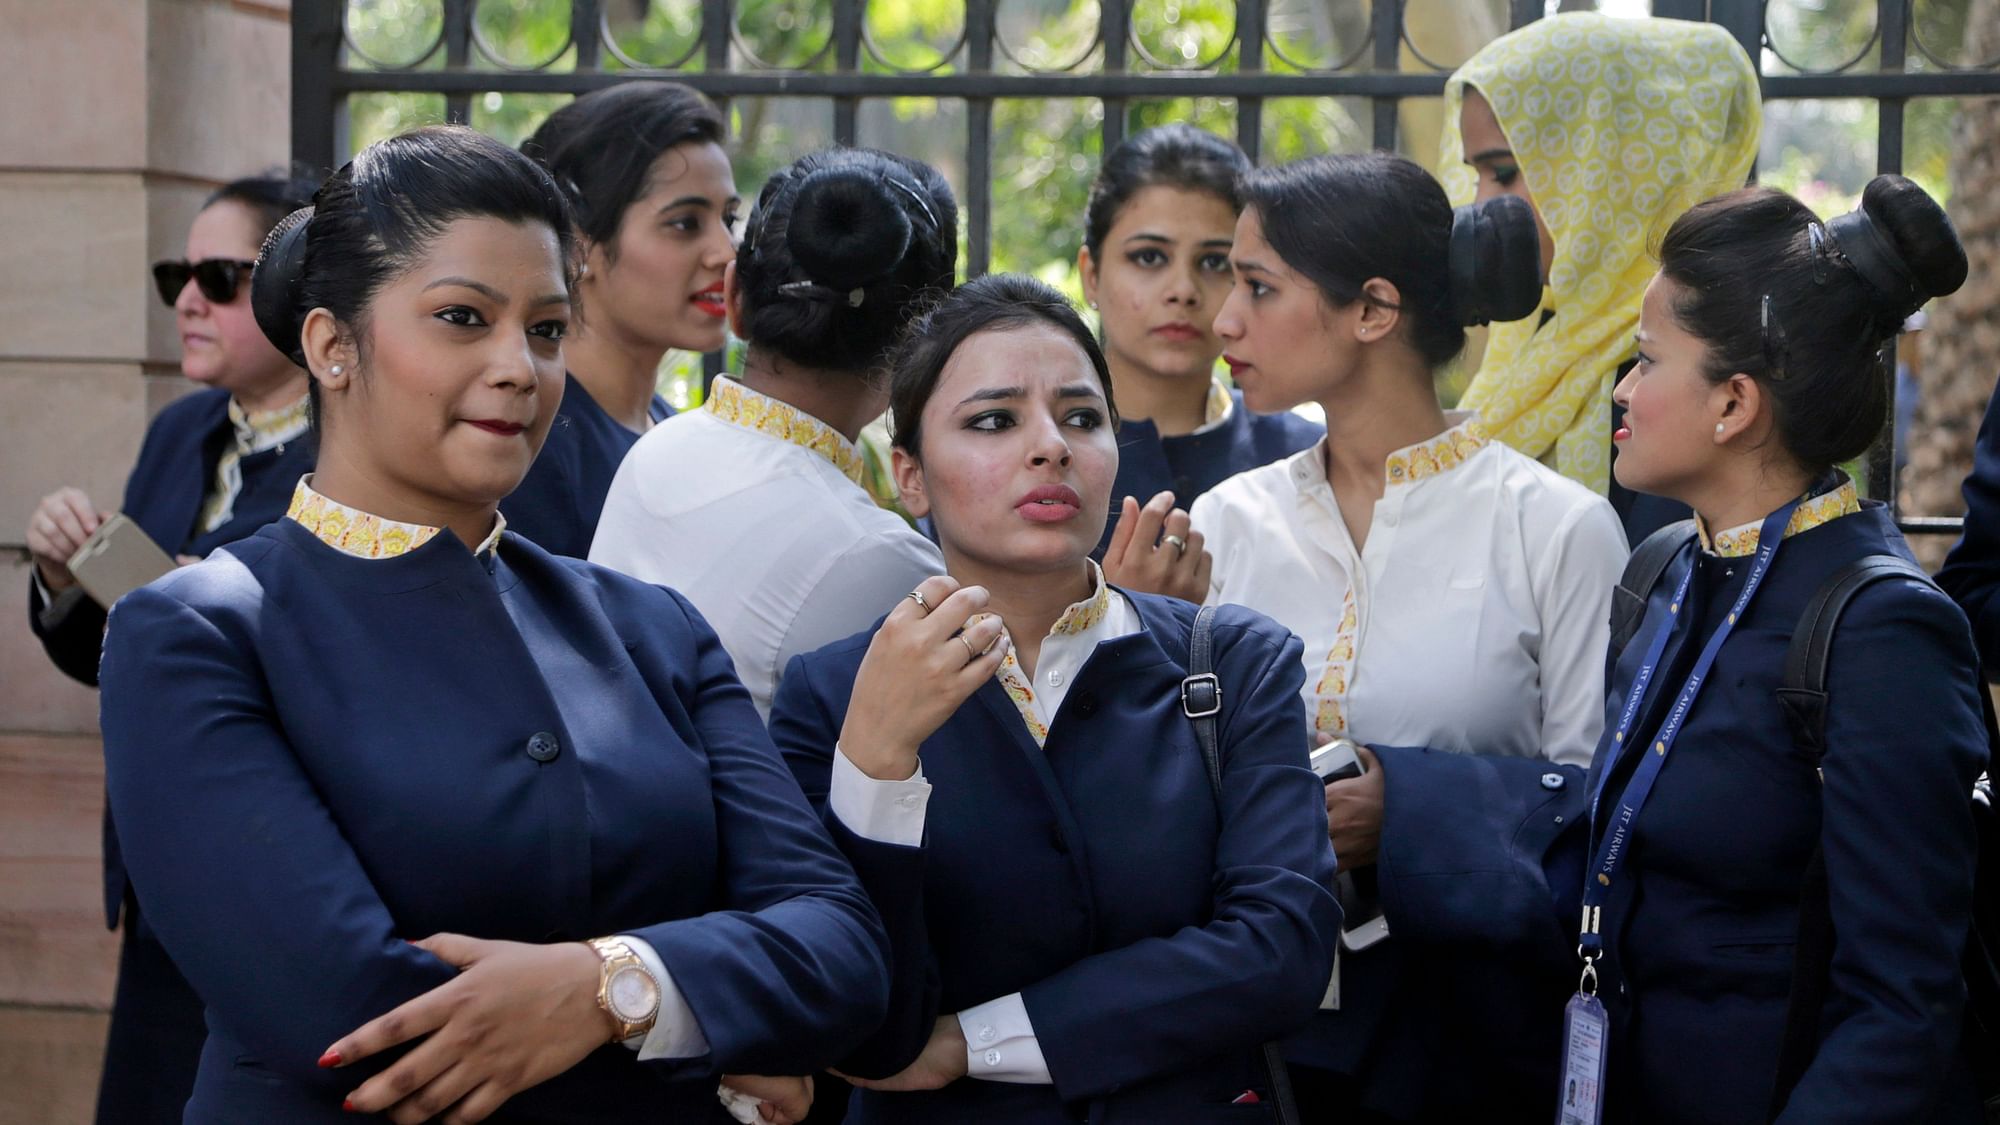 Employees of Jet Airways participate in a protest to demand clarification on unpaid salaries, in Mumbai, India, Friday, 12 April, 2019.